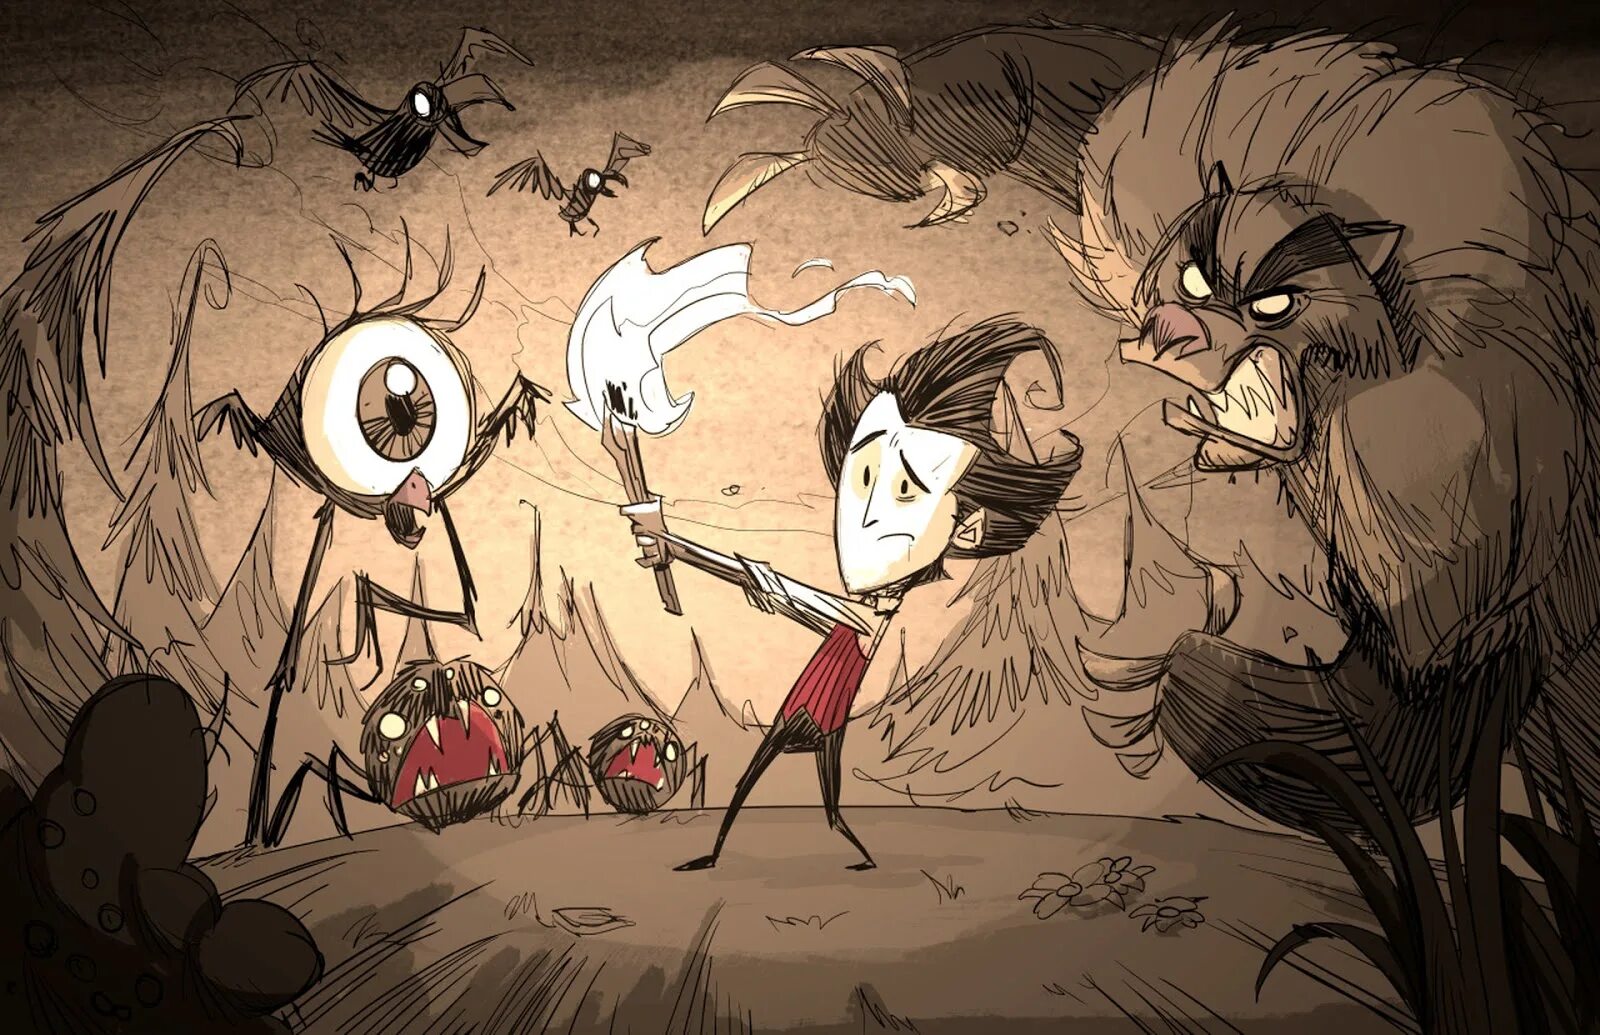 Don t starve gaming. Уилсон don't Starve Art. Don't Starve together Уилсон Art. Неголодайка Уилсон. Уилсон don't Starve концепт.